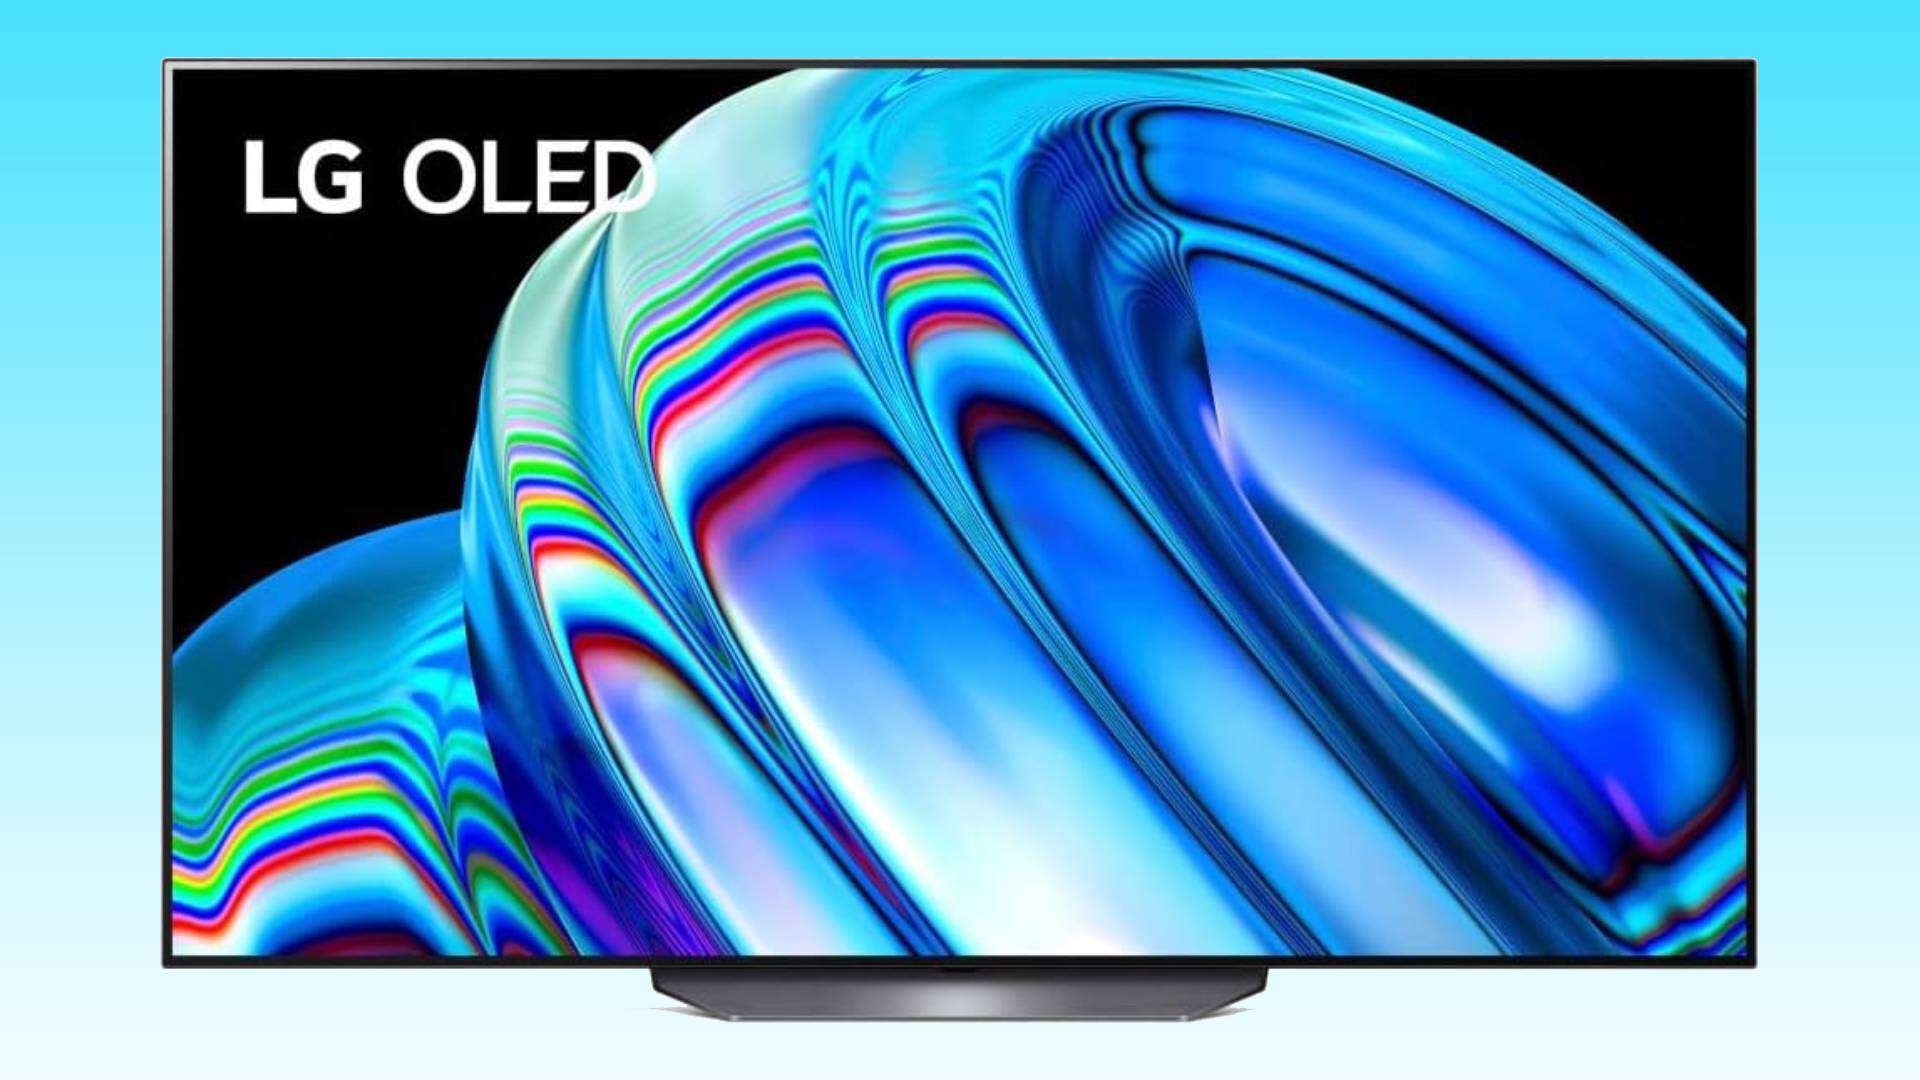 Amazon's 65 inch LG B2 OLED television displaying vibrant abstract colors.